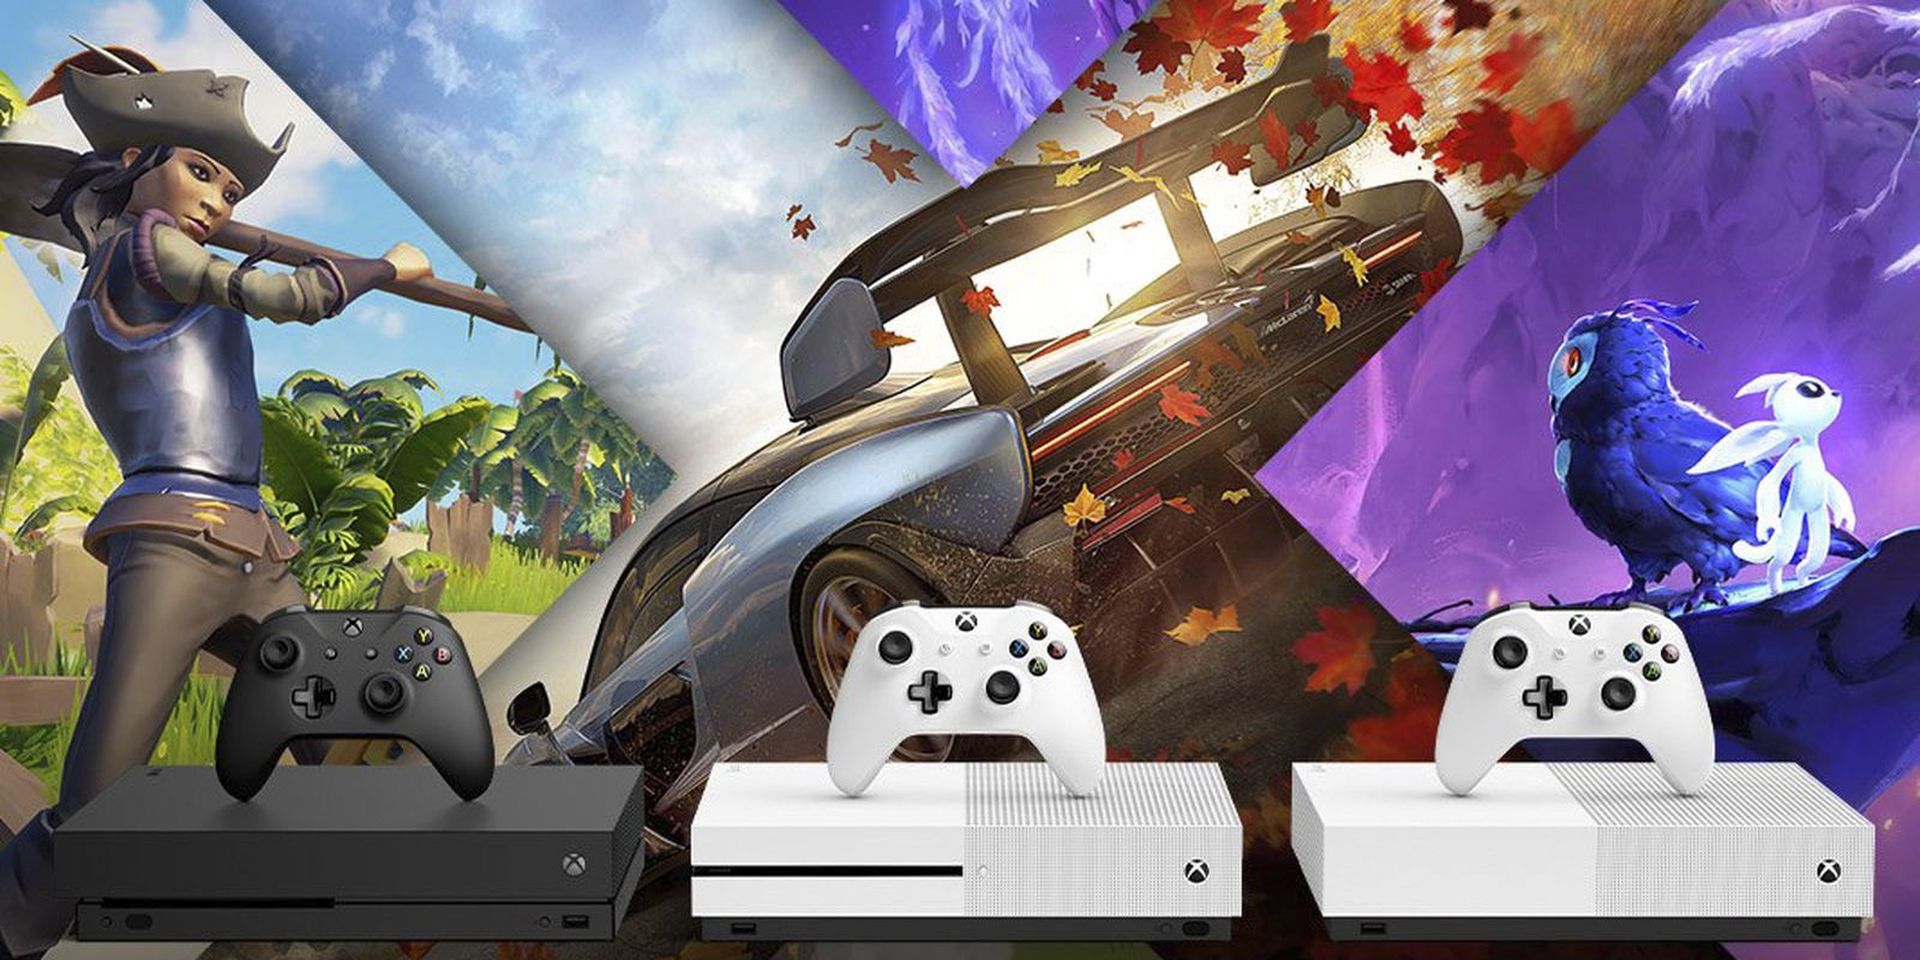 In this article, we are going to be covering how to play Xbox games on your phone, so you can play your favorite games wherever you go.